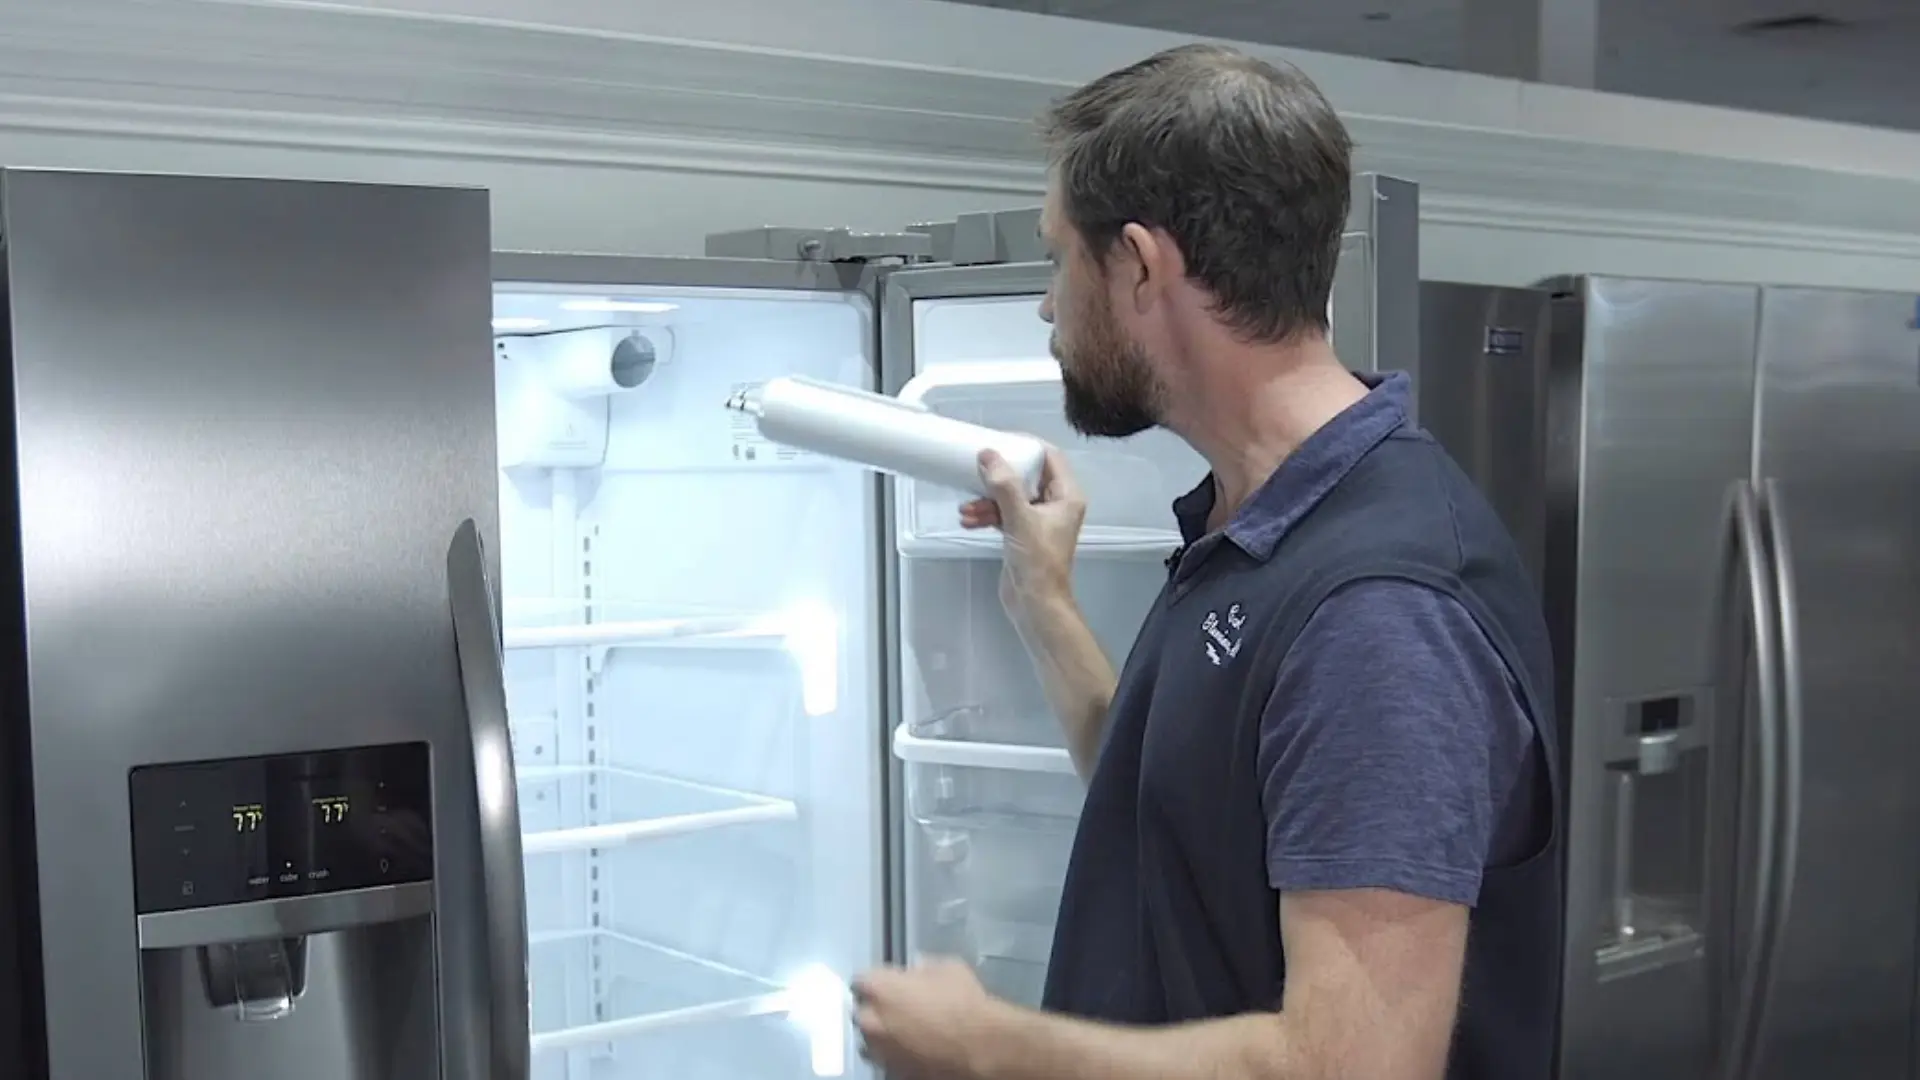 Best Method To Replace An External Water Filter On a Samsung Refrigerator